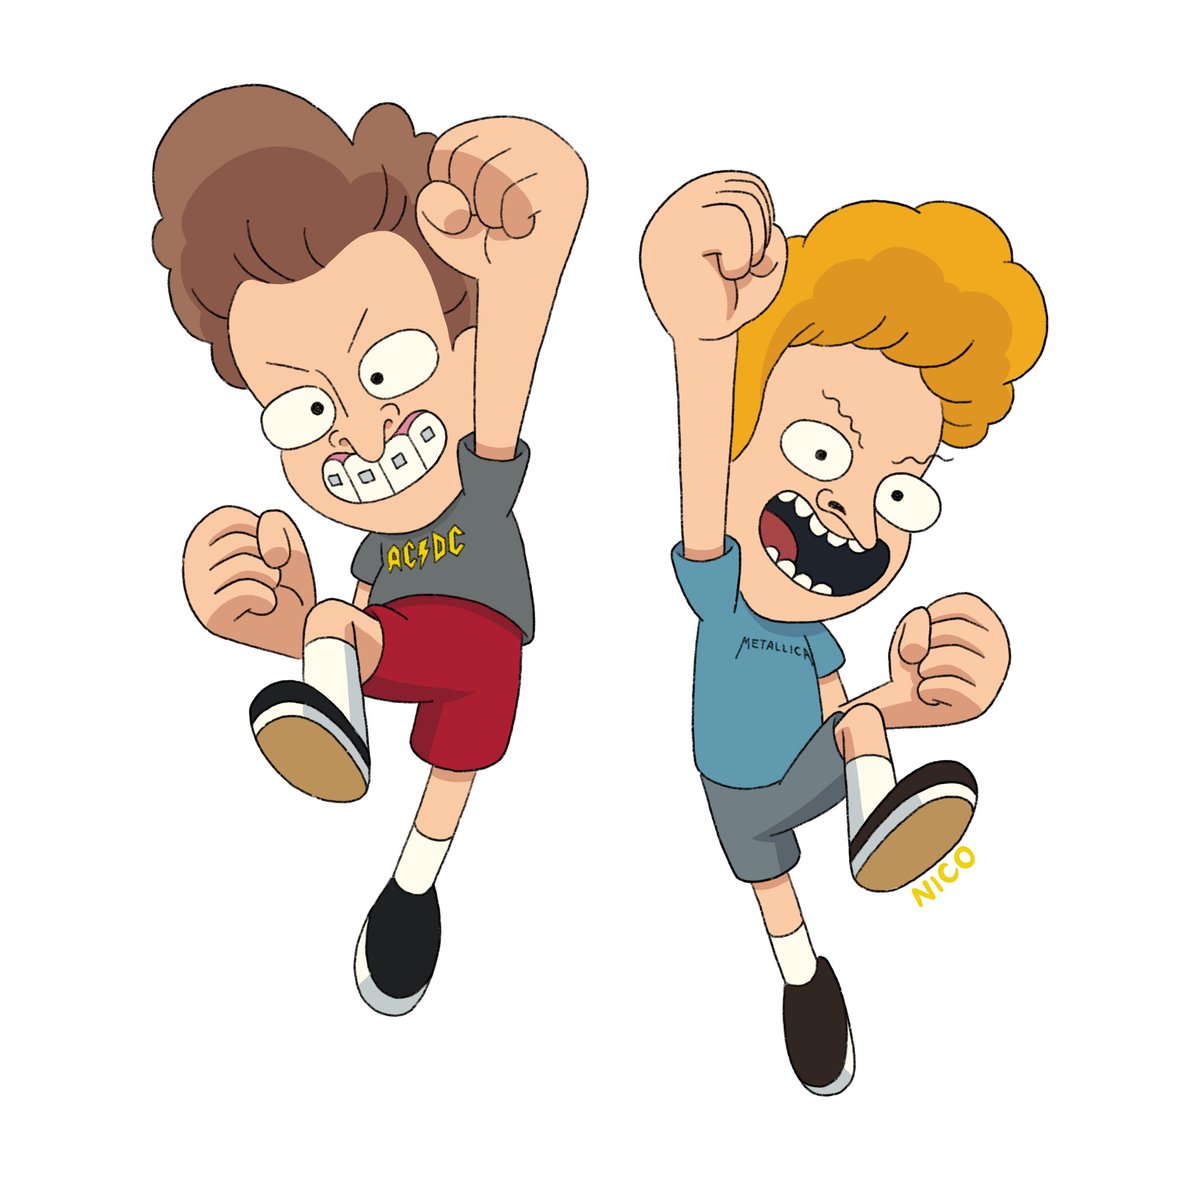 「like let's-A GO beavis!! ..or something 」|Nico Escalada ✨ (LOOKING FOR WORK)のイラスト